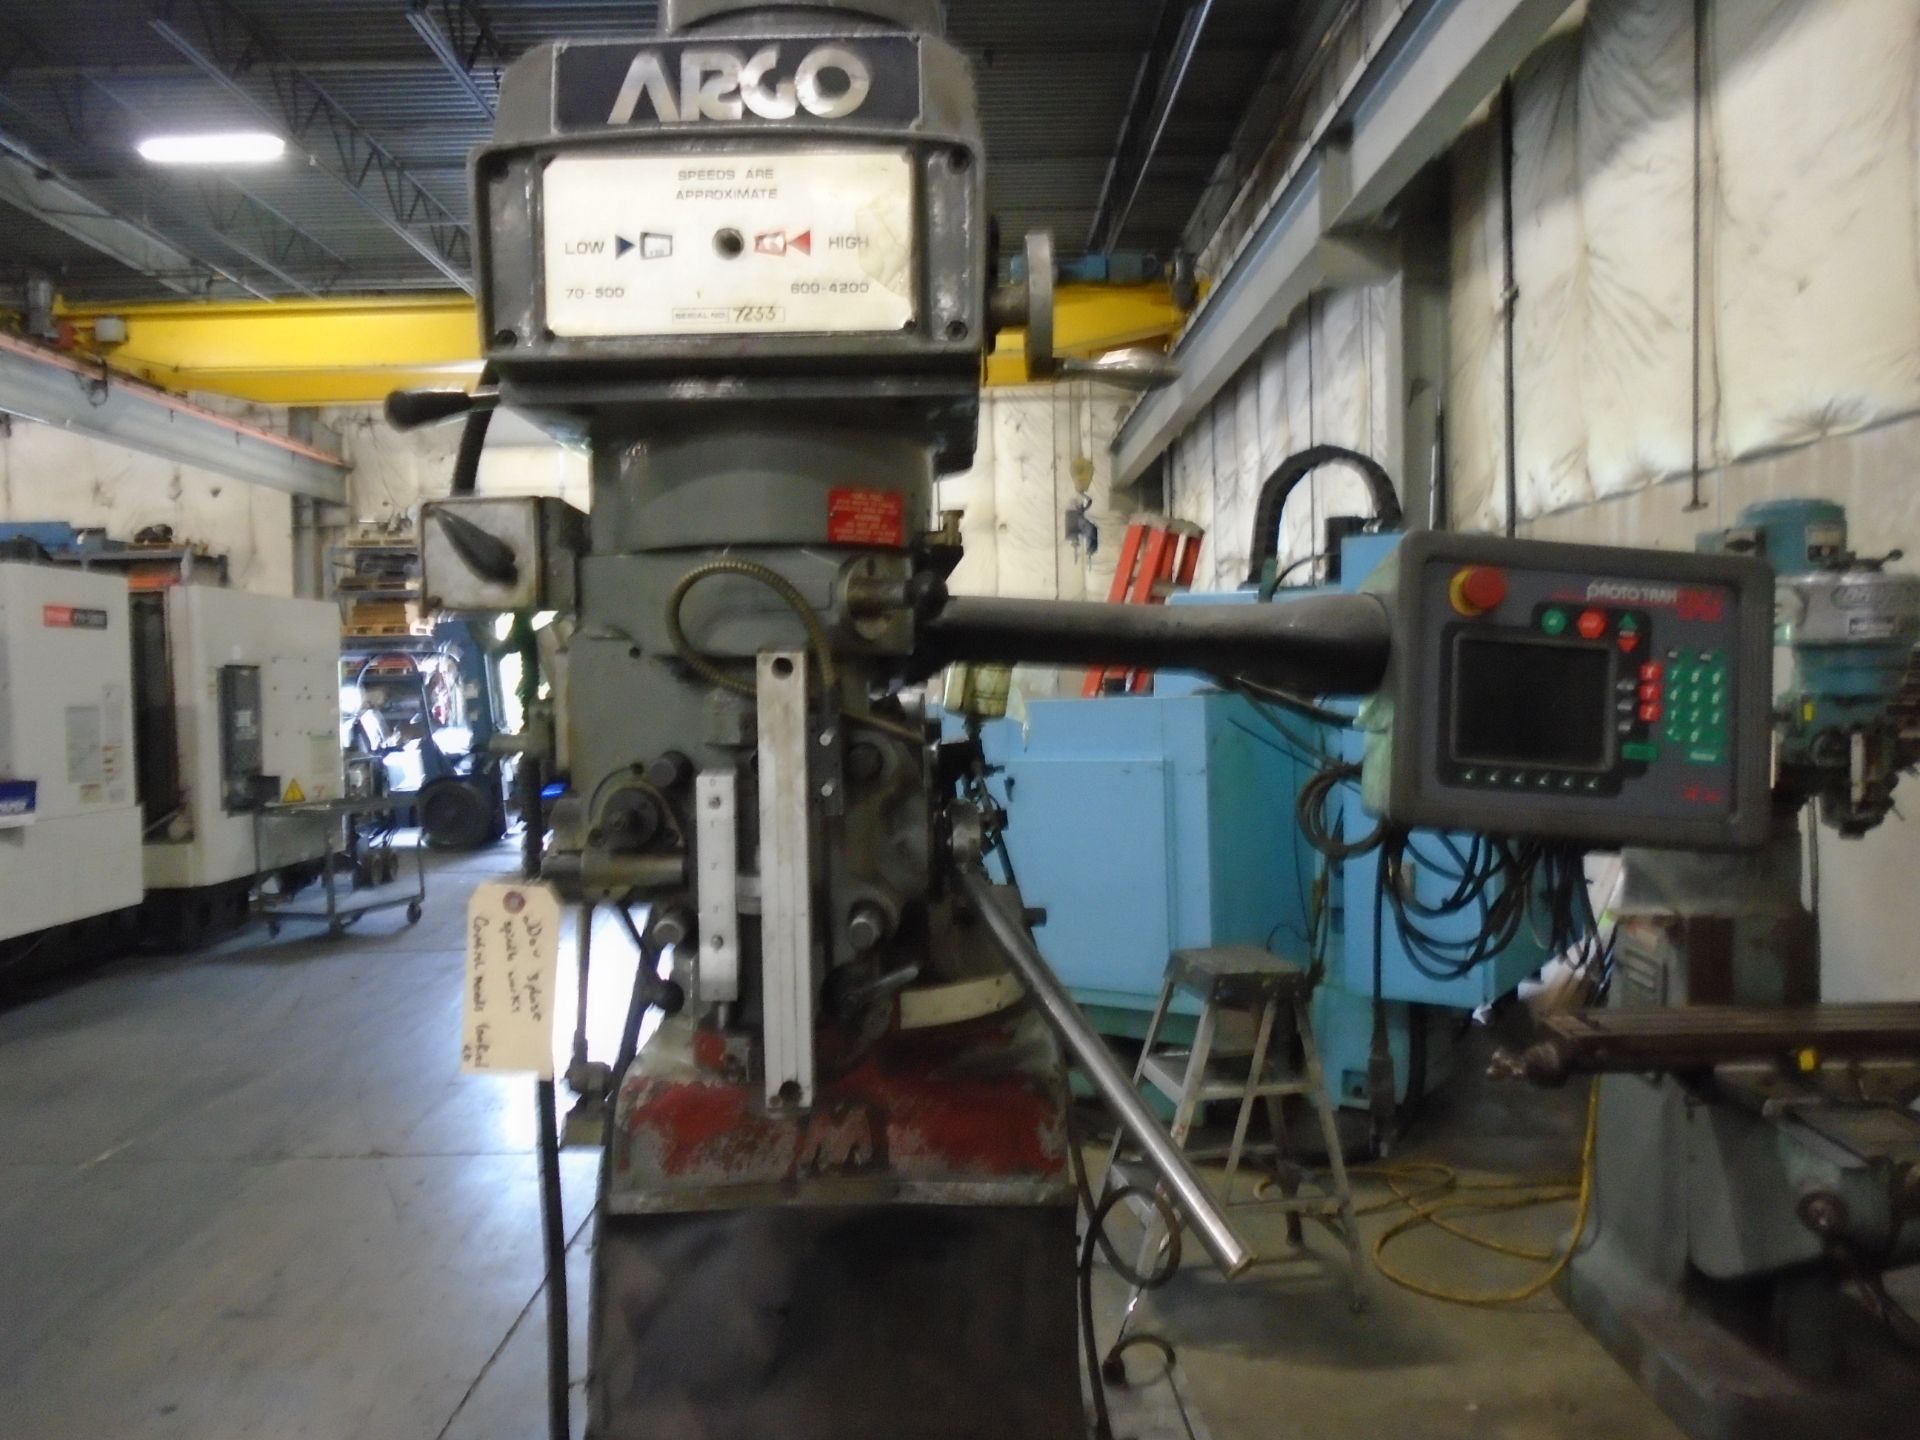 Argo Vertical CNC Mill With Proto Trak Edge CNC Control 2 Axis - Image 7 of 12